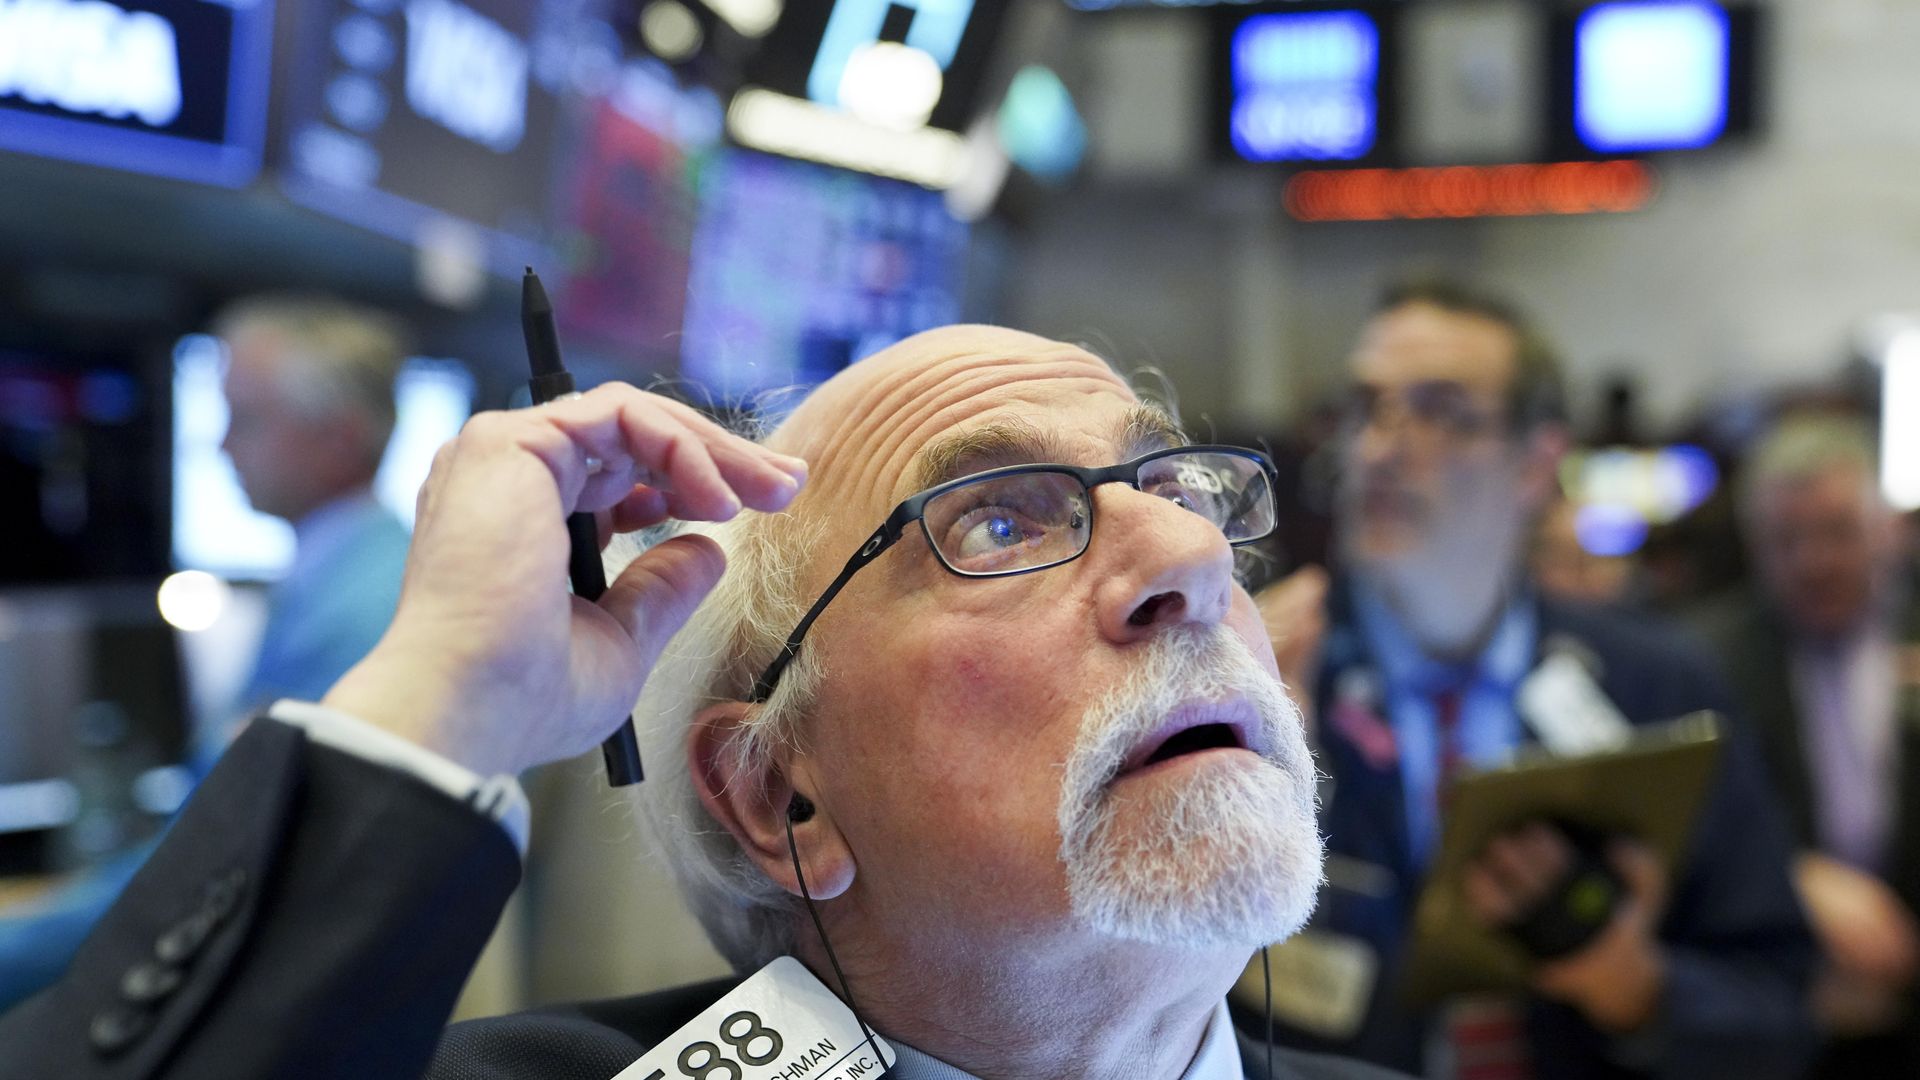 This is a classic photo of a stock market trader looking at a screen